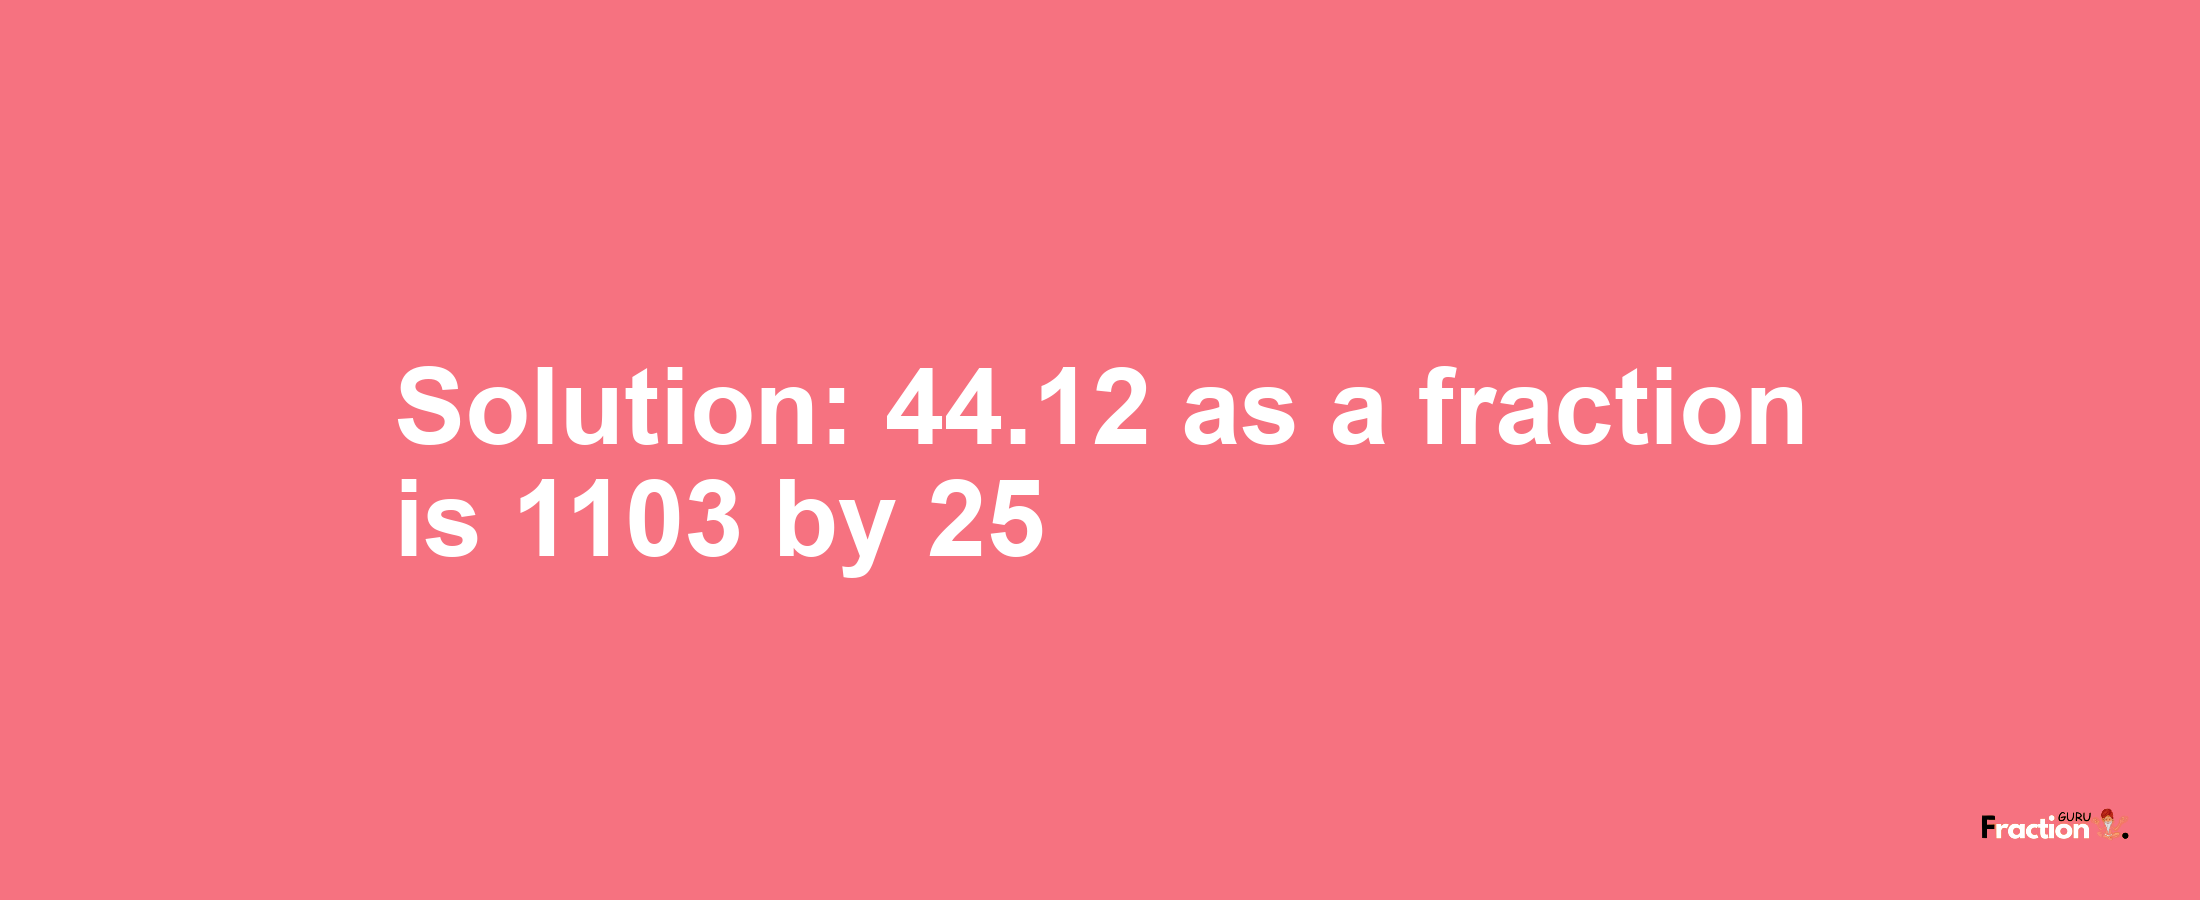 Solution:44.12 as a fraction is 1103/25